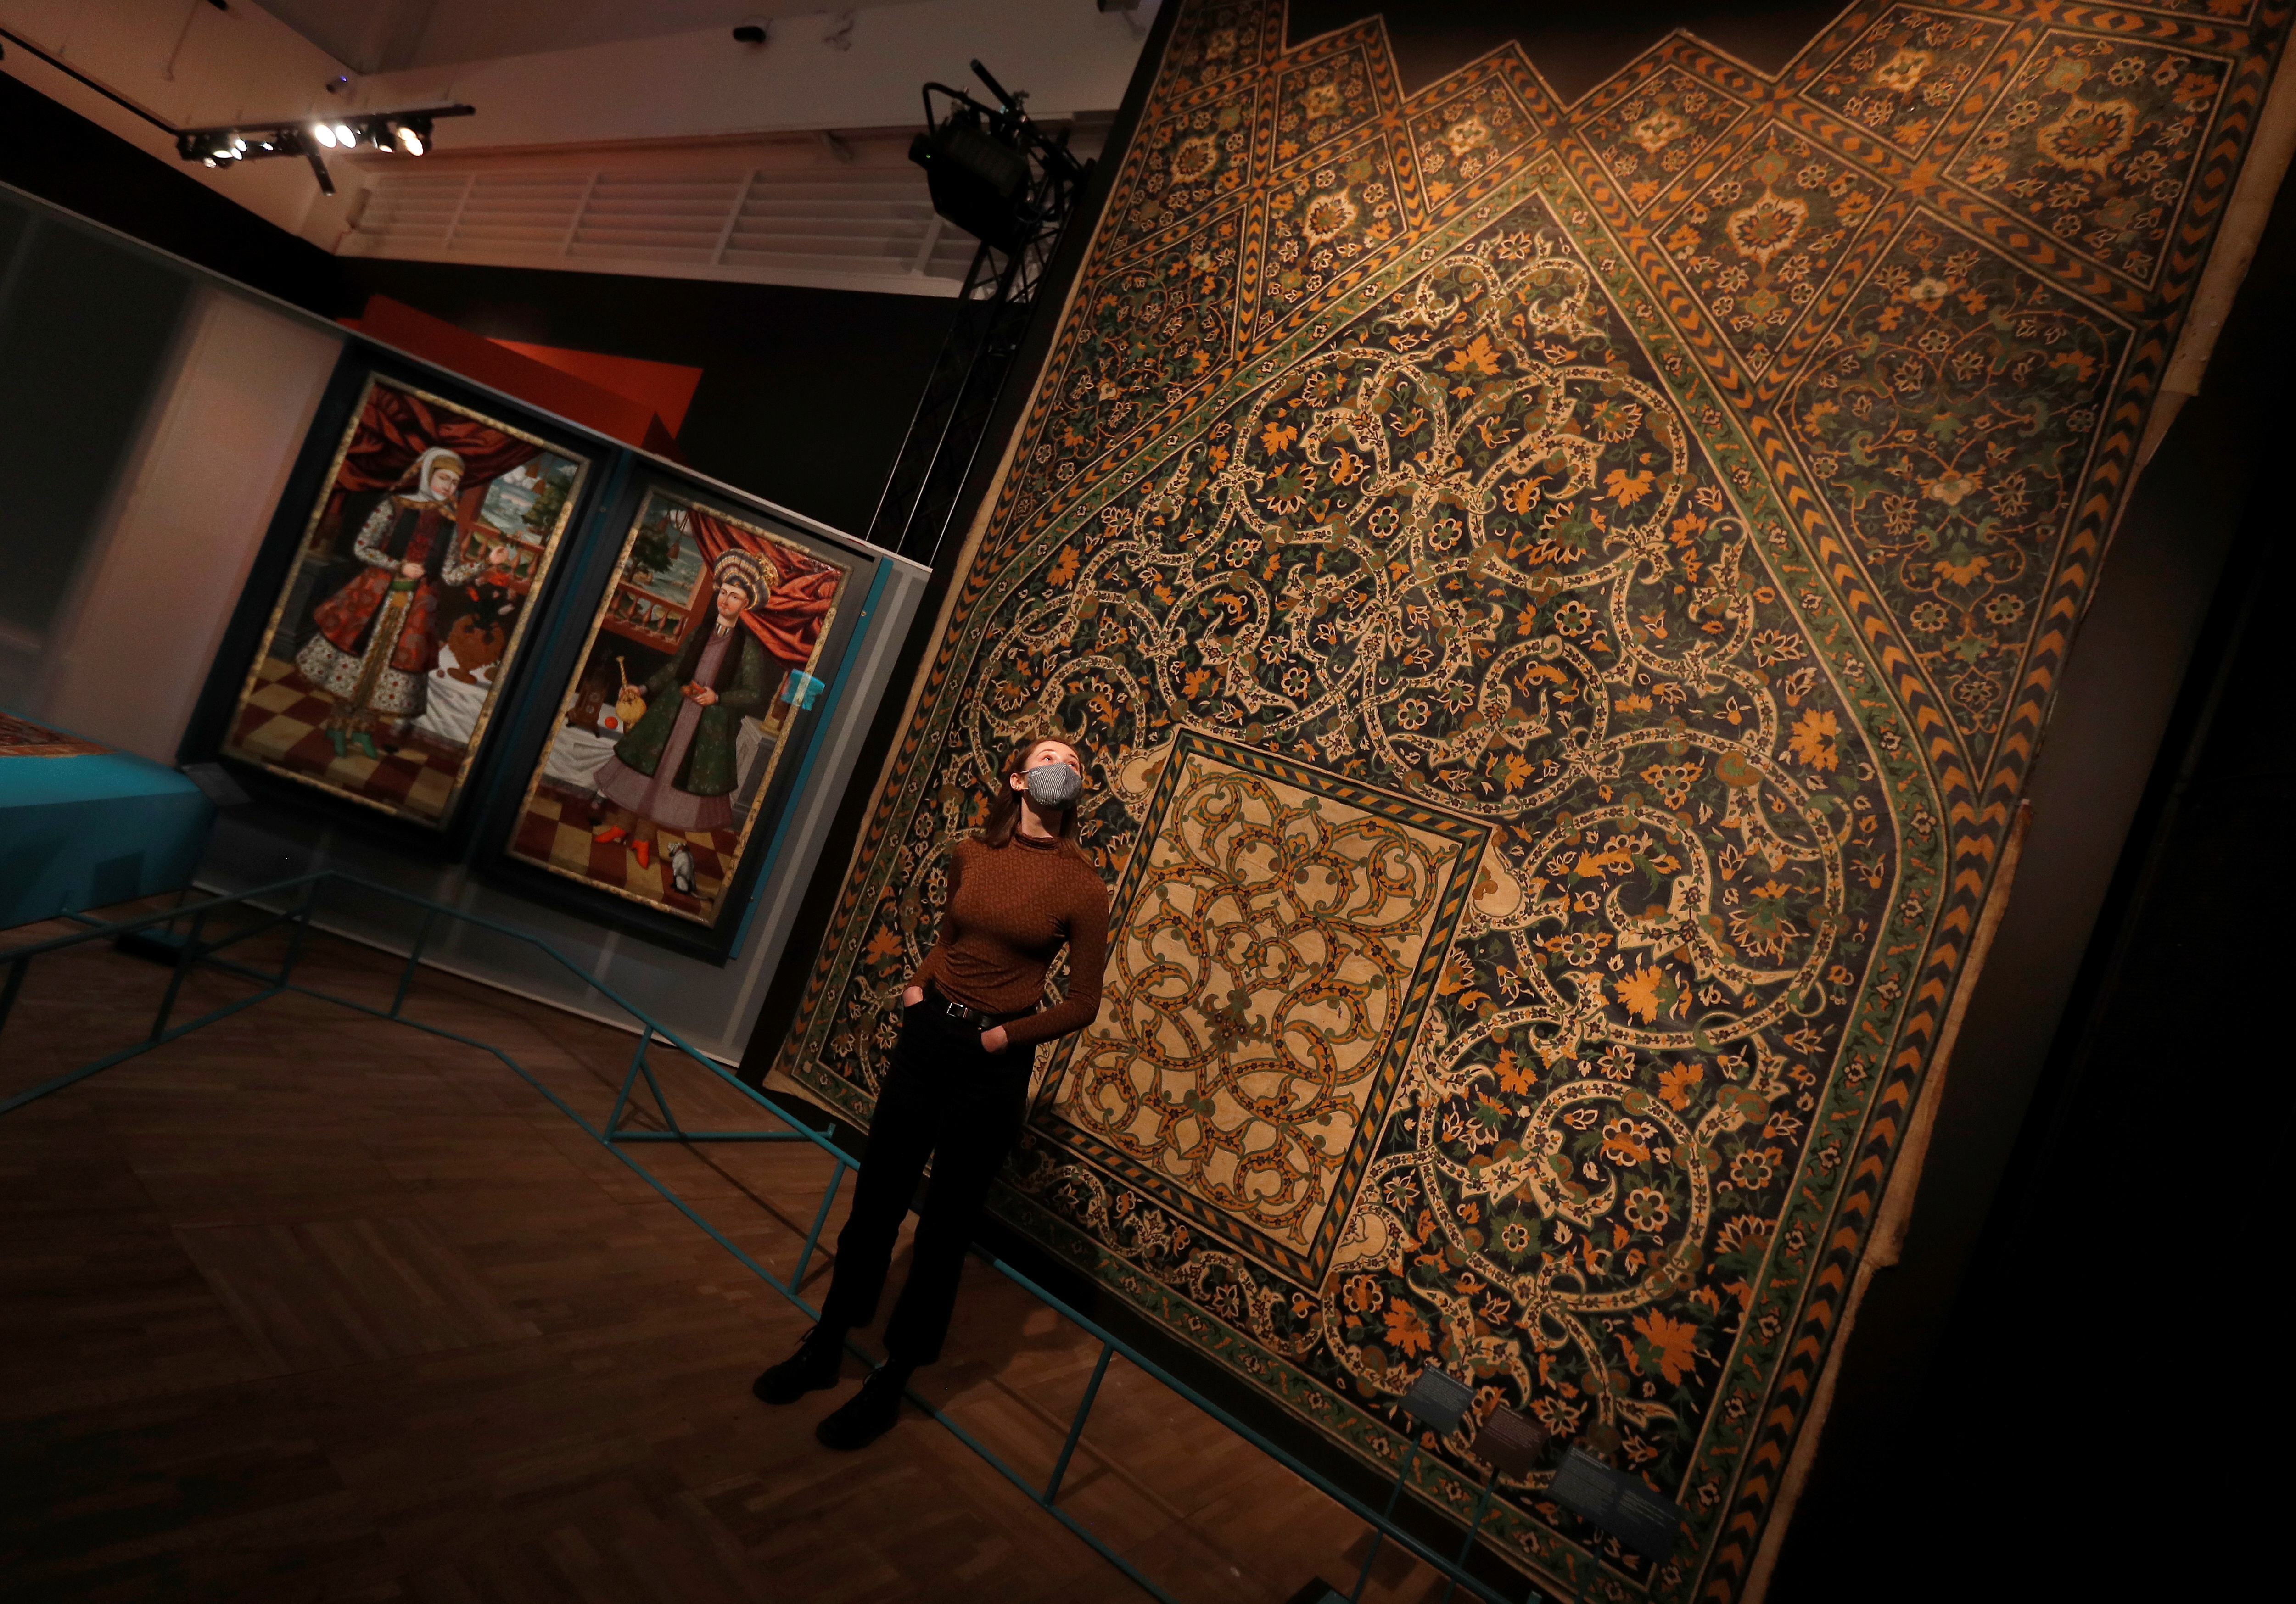 Epic Iran, an exhibition soon to open at the V&A in London